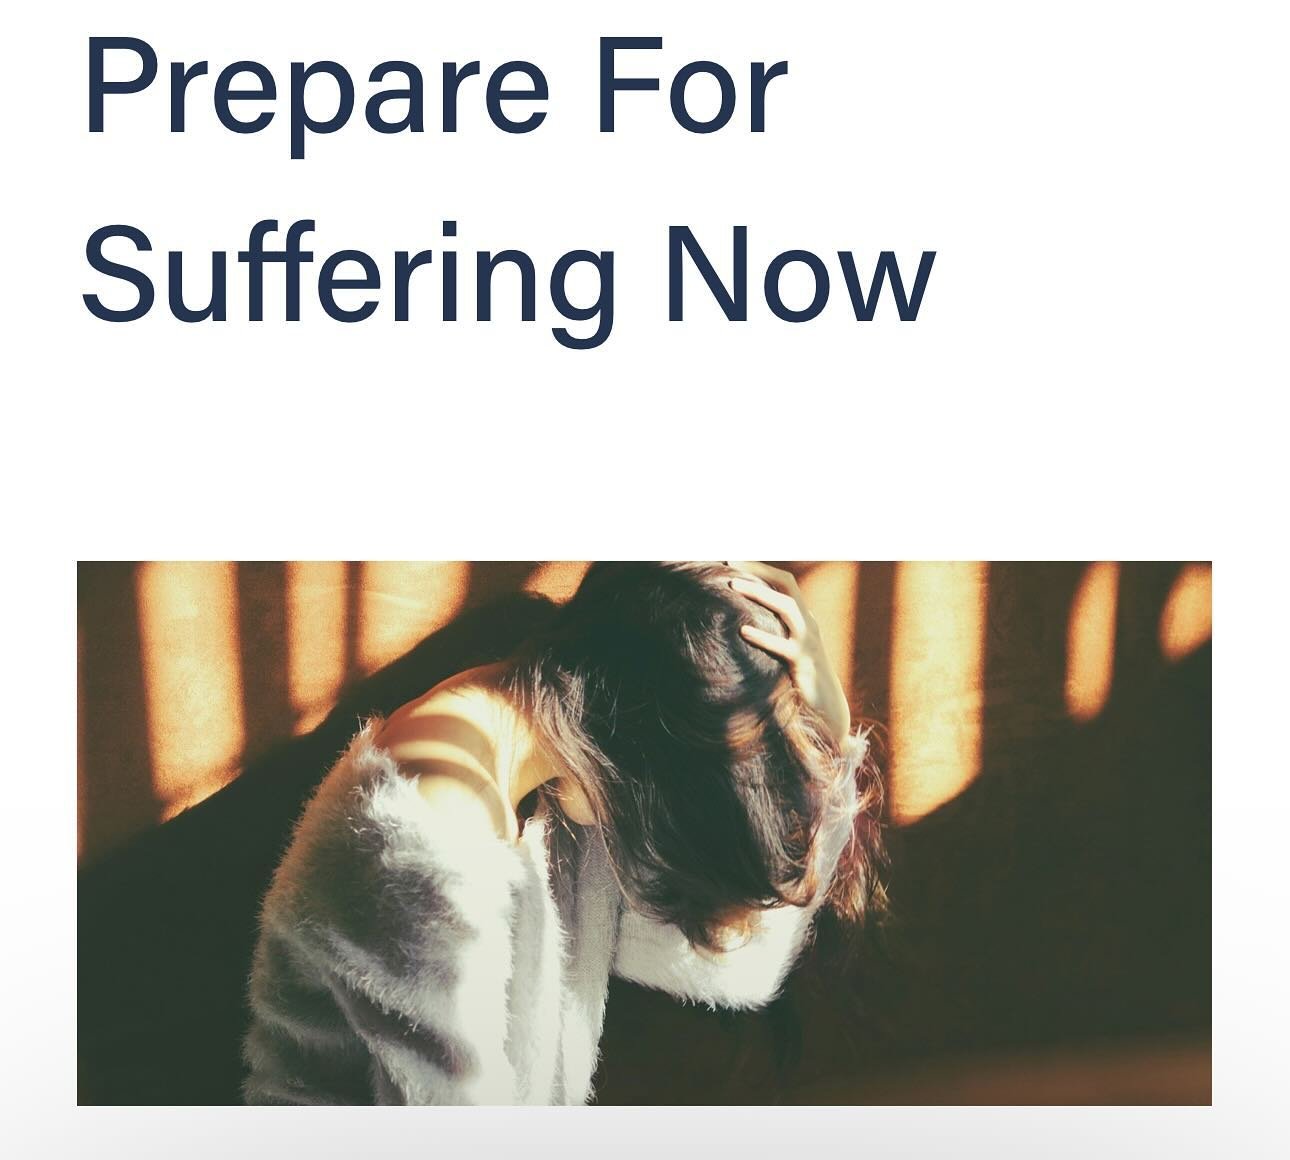 Check out this blog post on suffering and God&rsquo;s never-ending presence through the valleys! 

https://www.newcityatthemill.org/blog/prepare-for-suffering-now